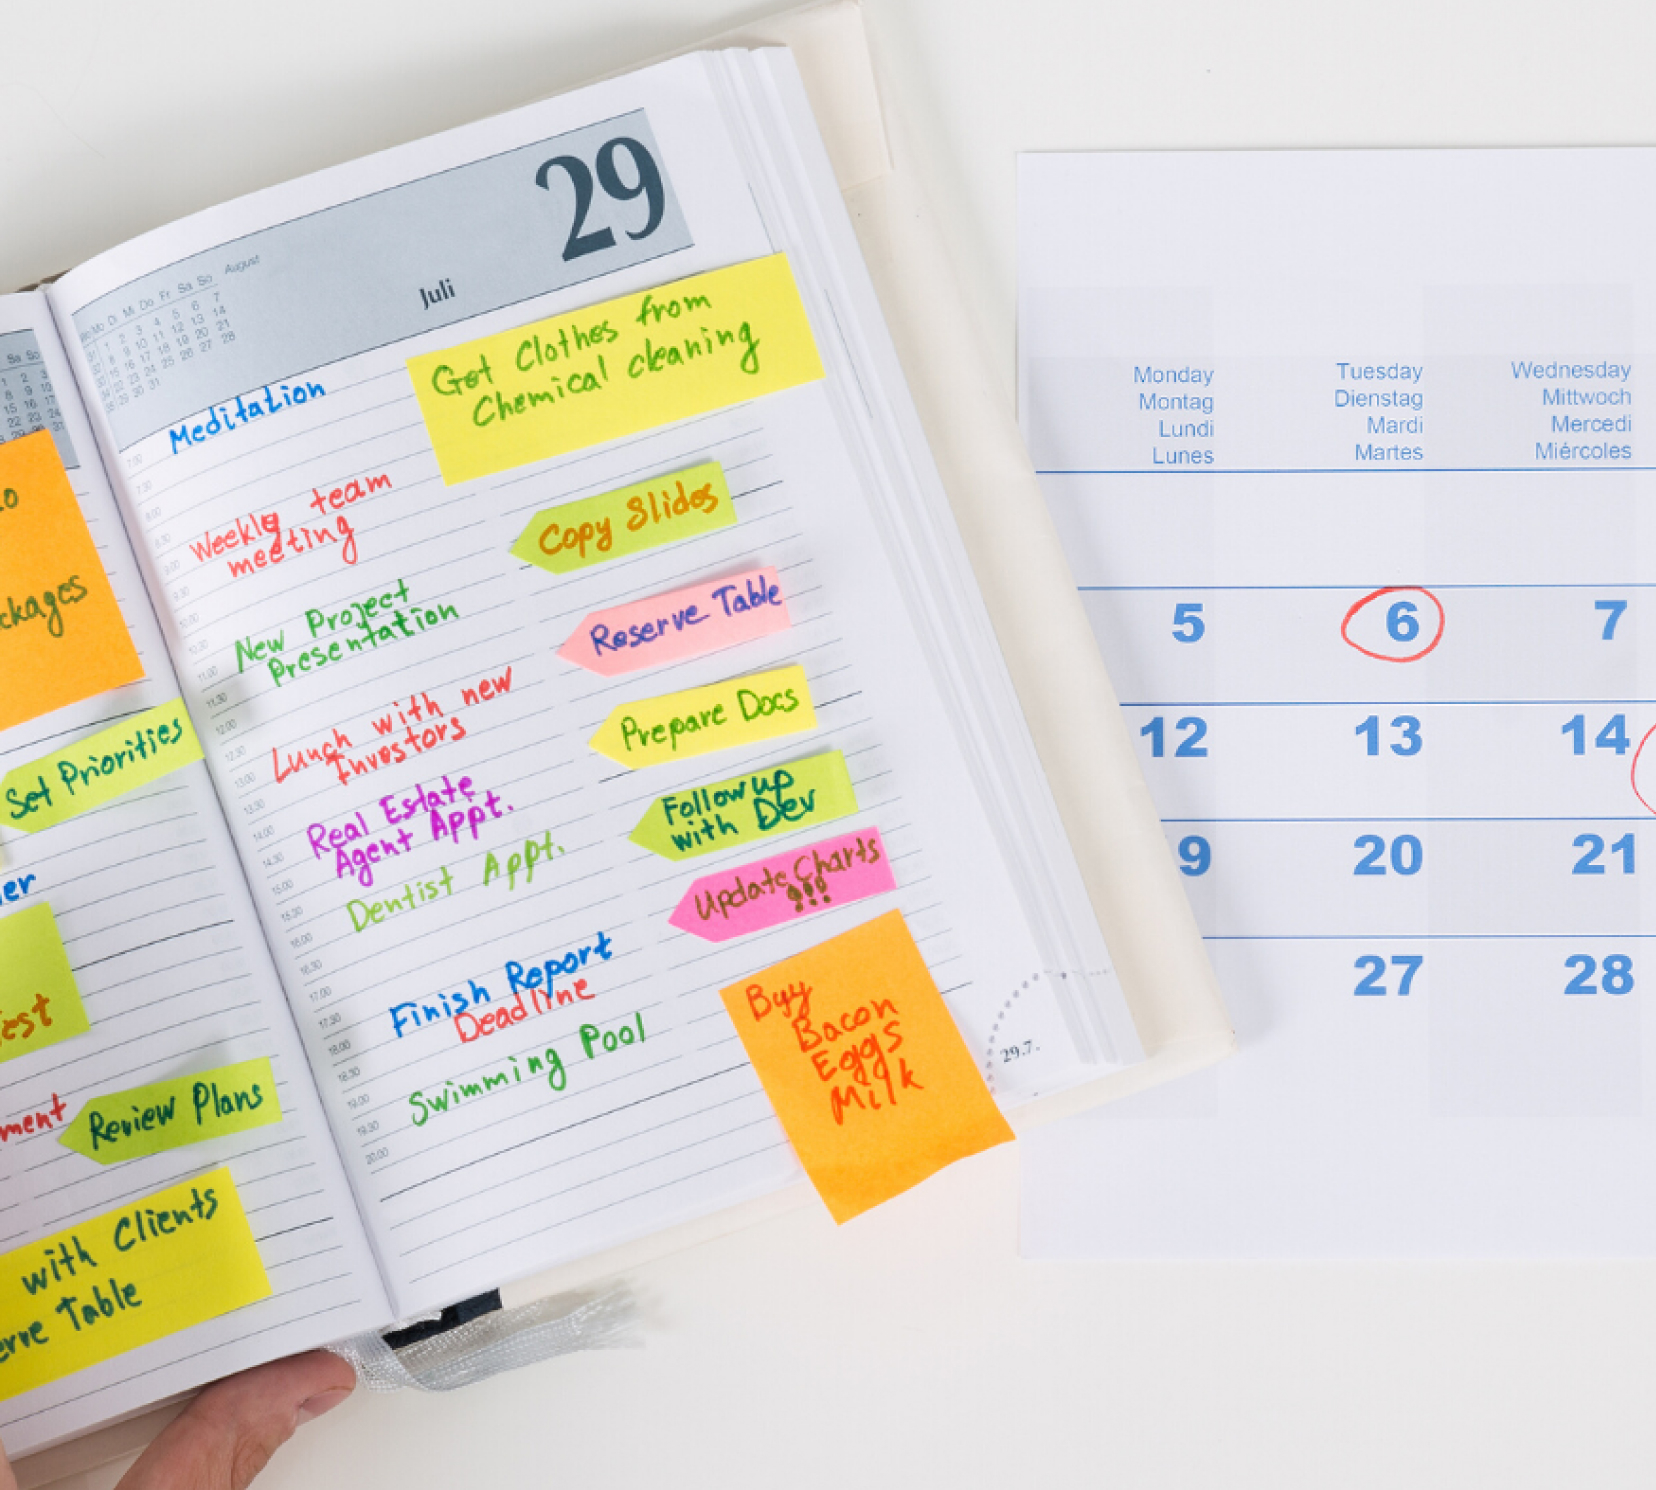 Build the ultimate content calendar for your school